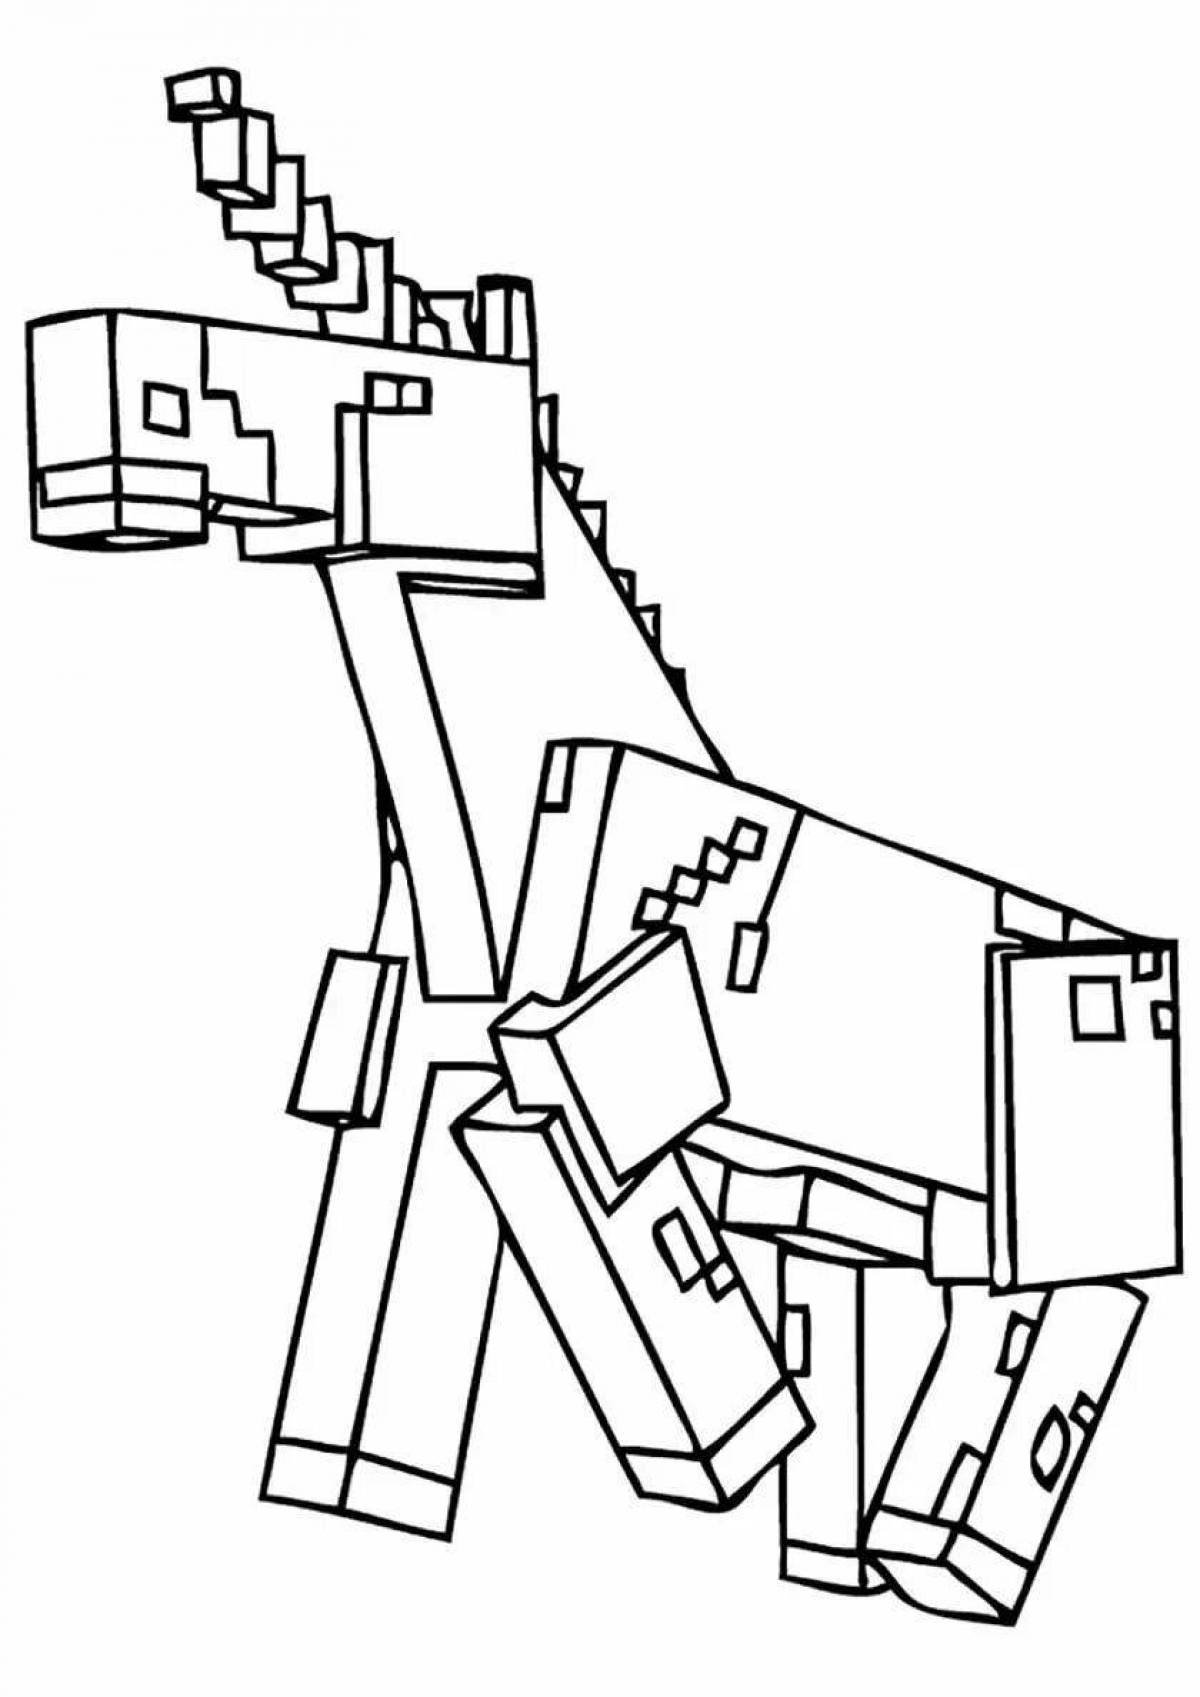 Fancy minecraft horse coloring